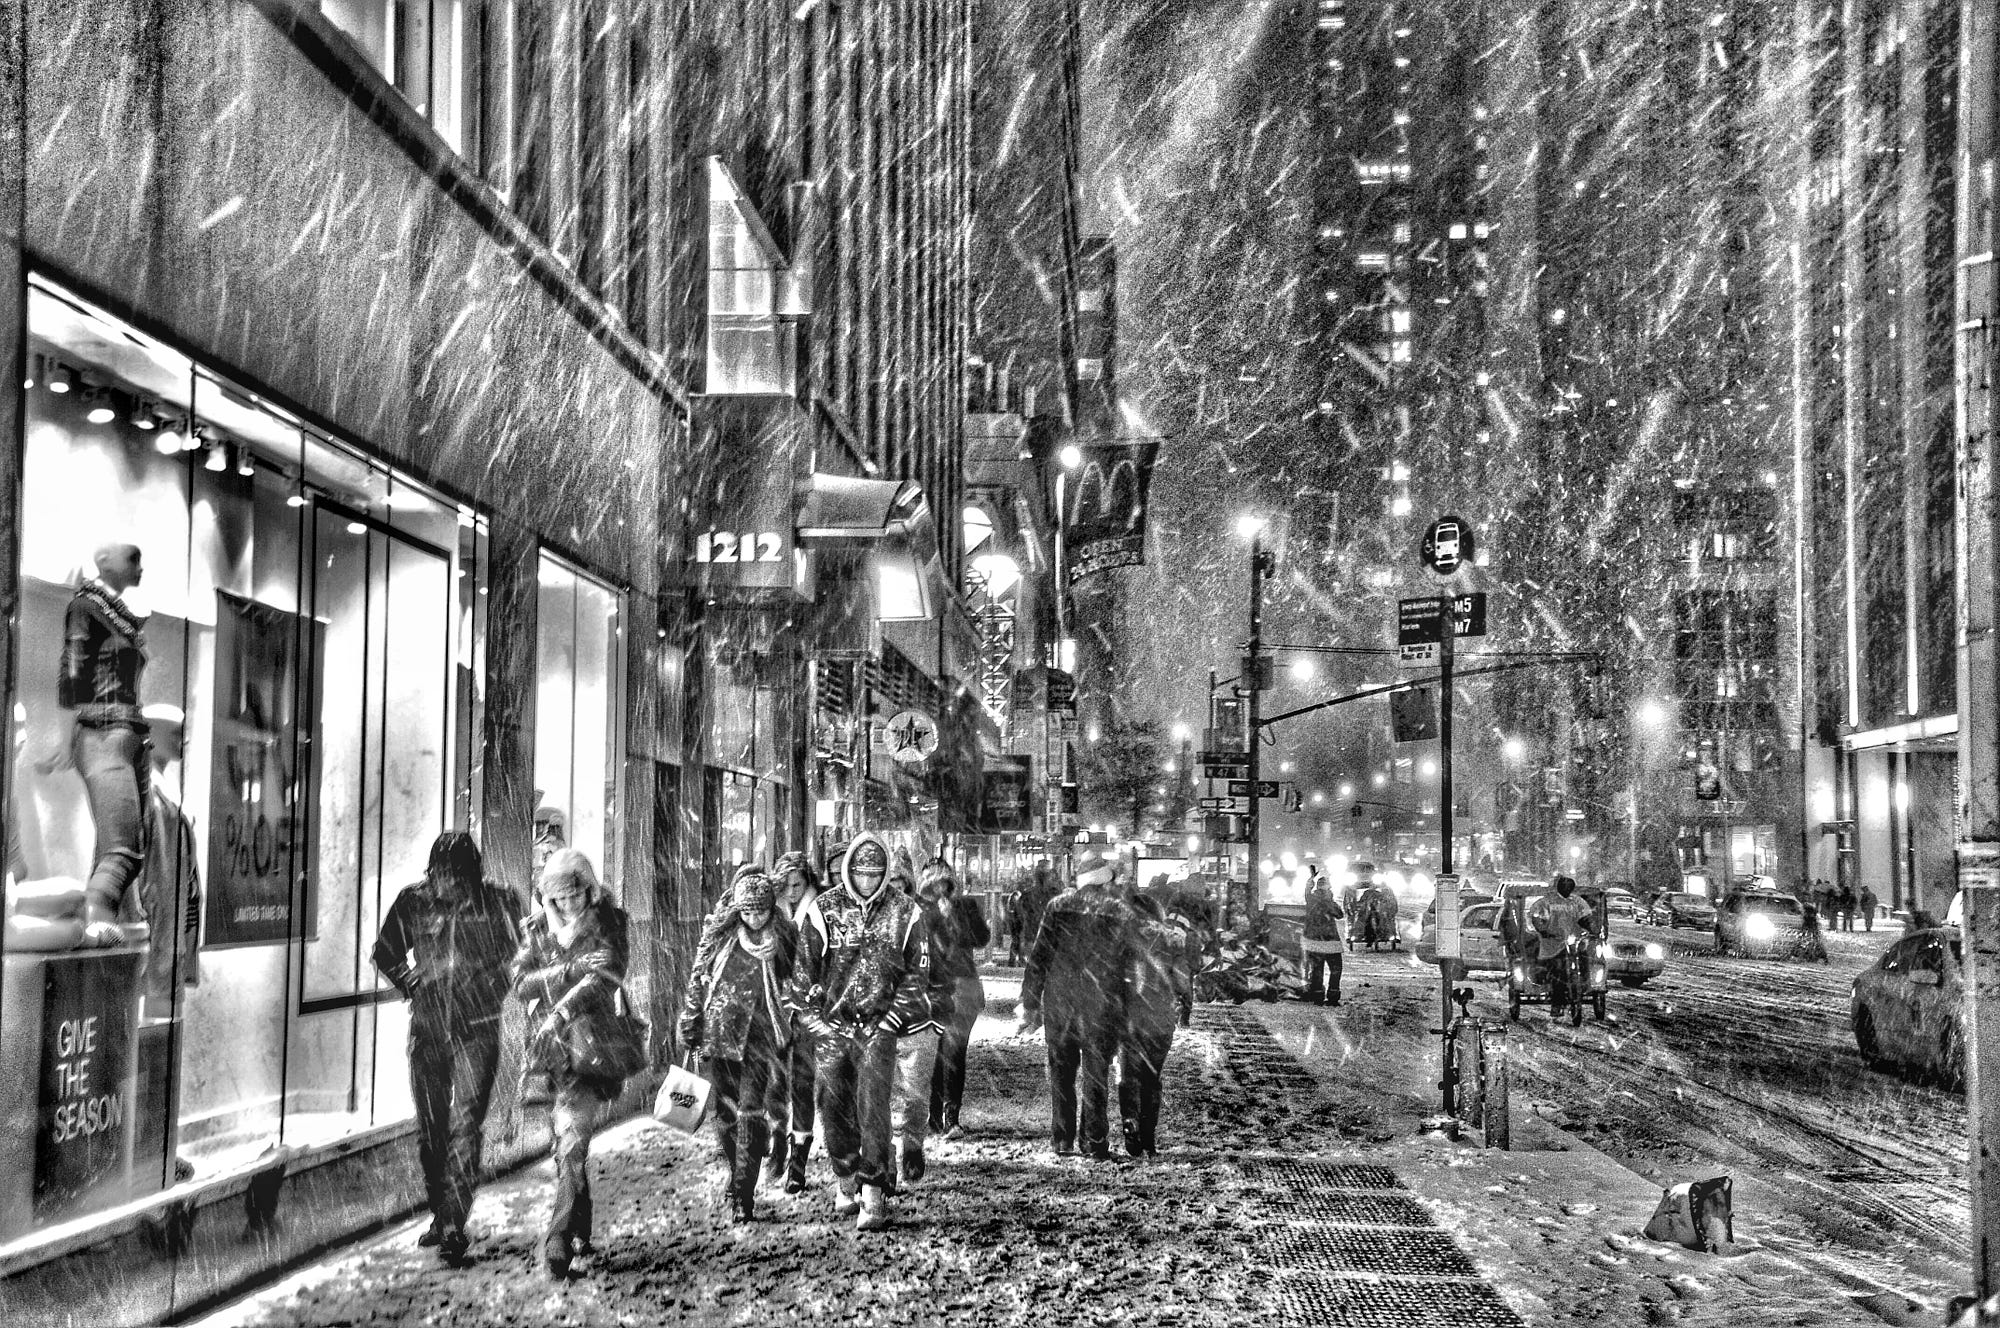 NYC Christmas in a time of plague: a photo essay